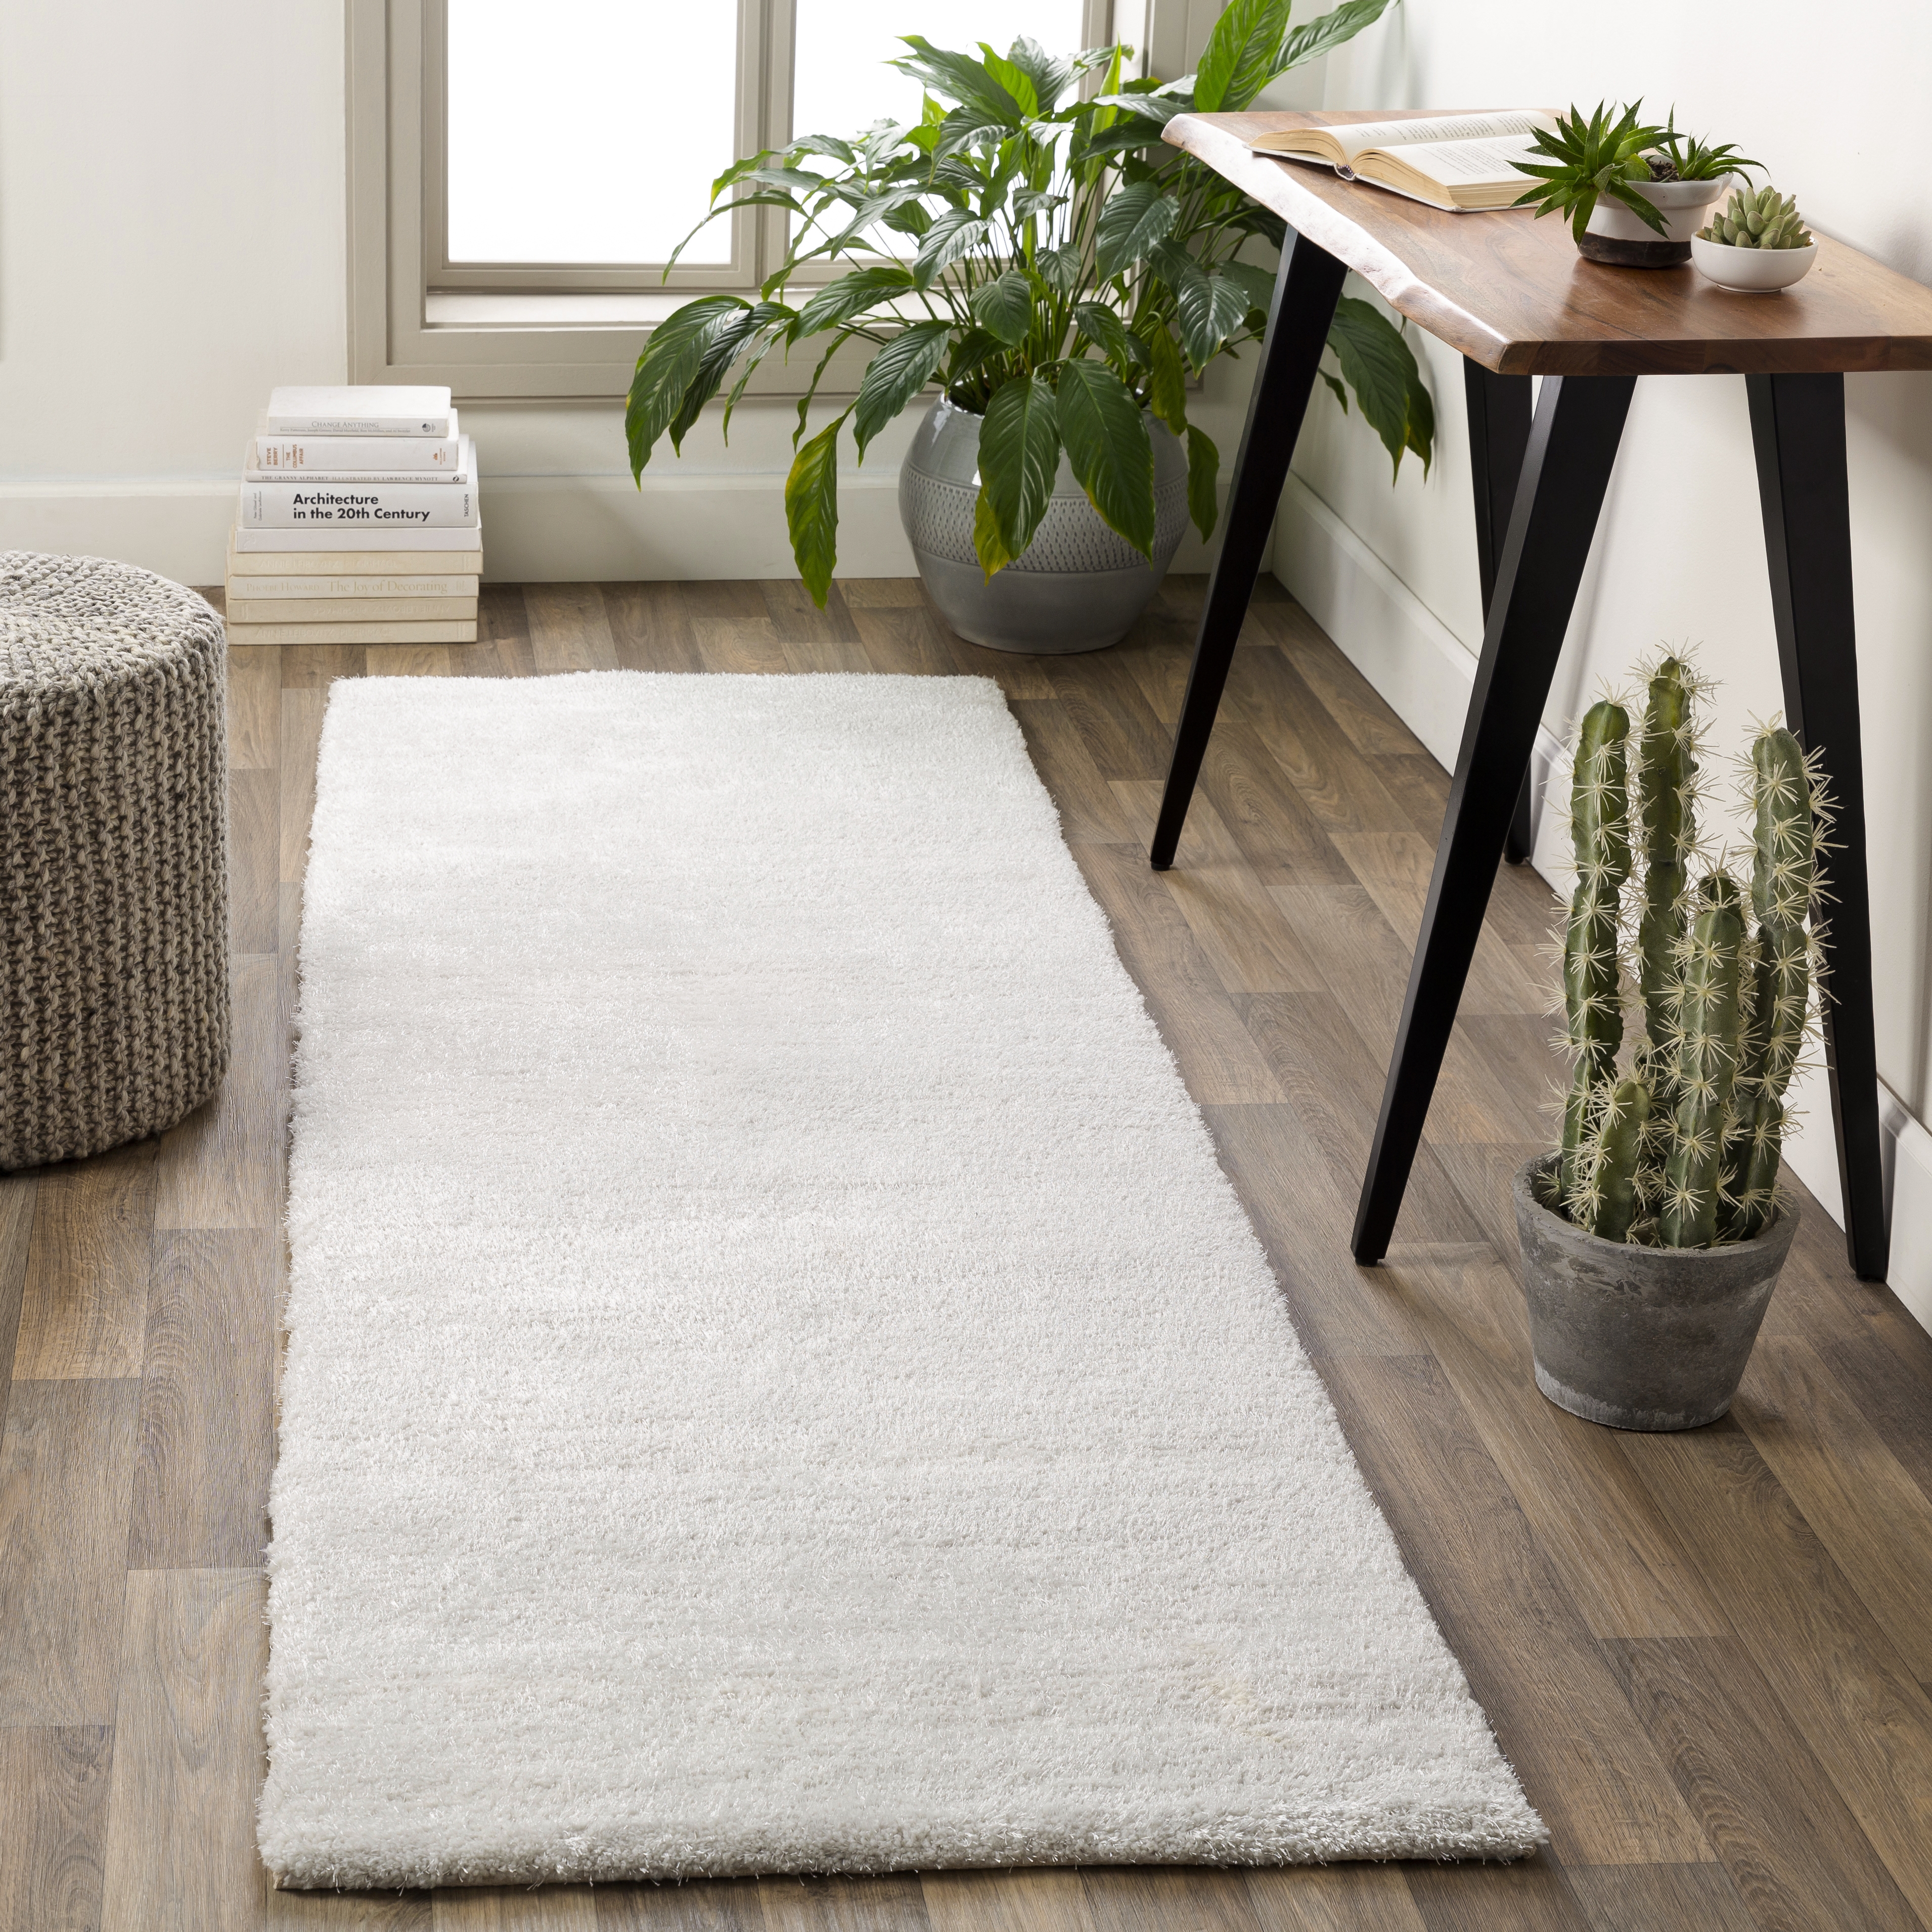 Marvin 8' x 10' Area Rug - Image 1